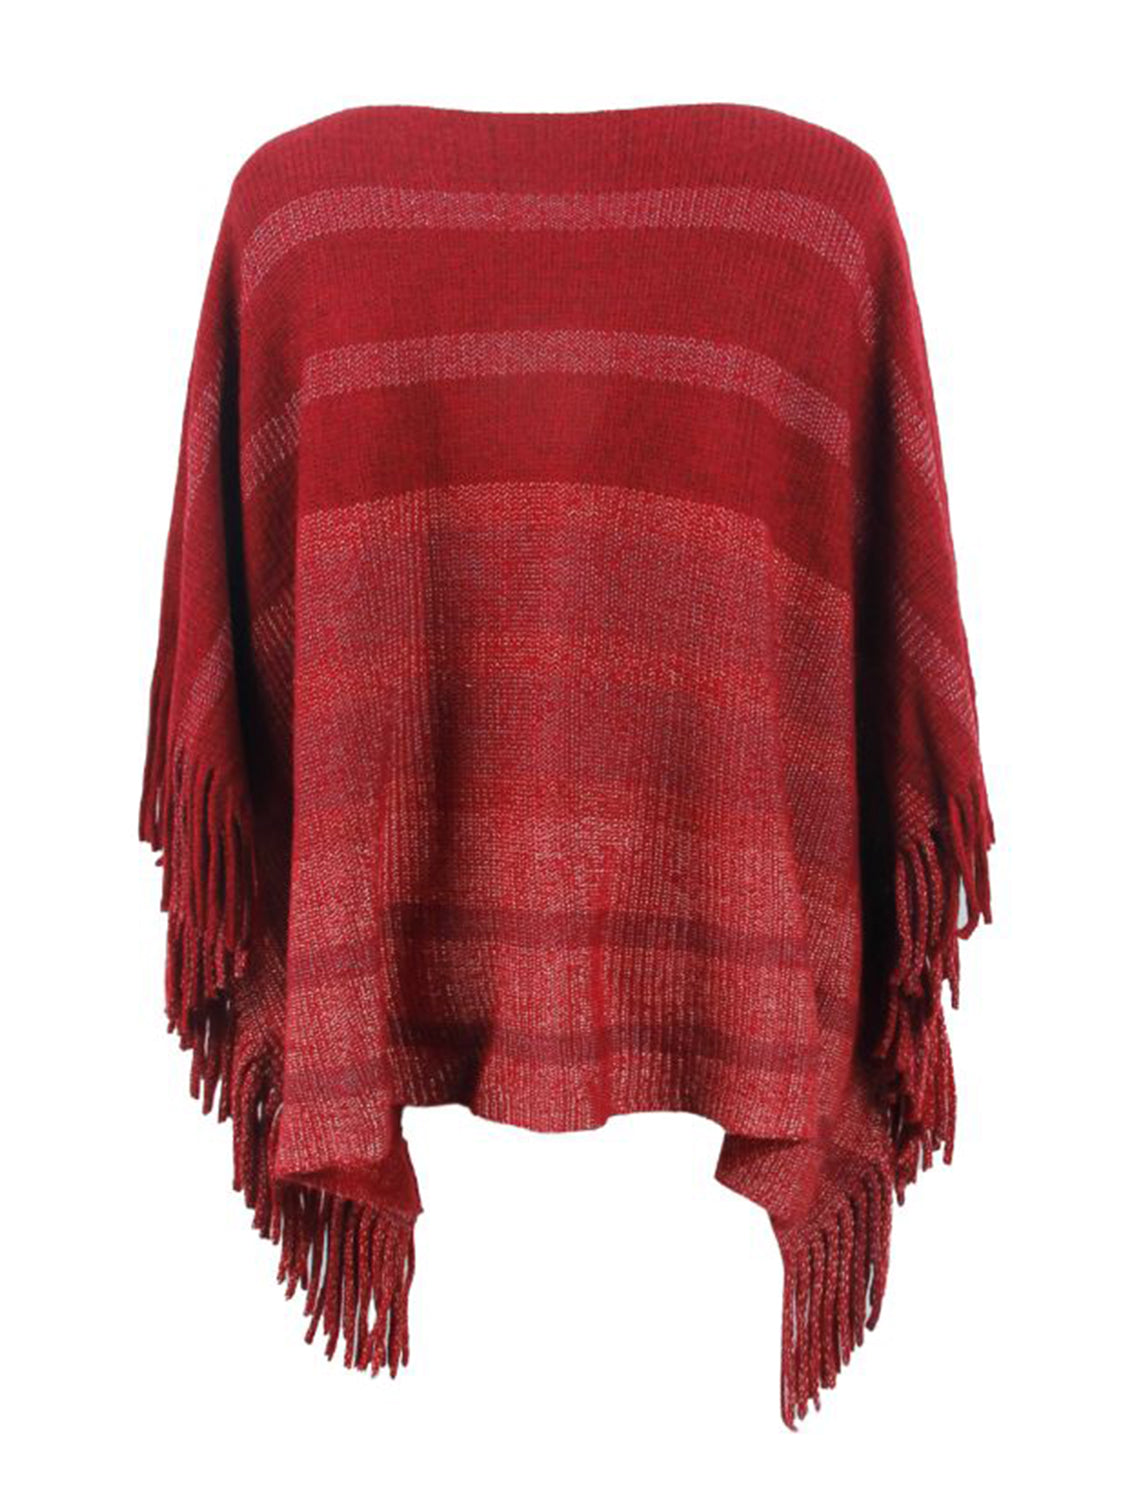 Striped Boat Neck Poncho with Fringes BLUE ZONE PLANET